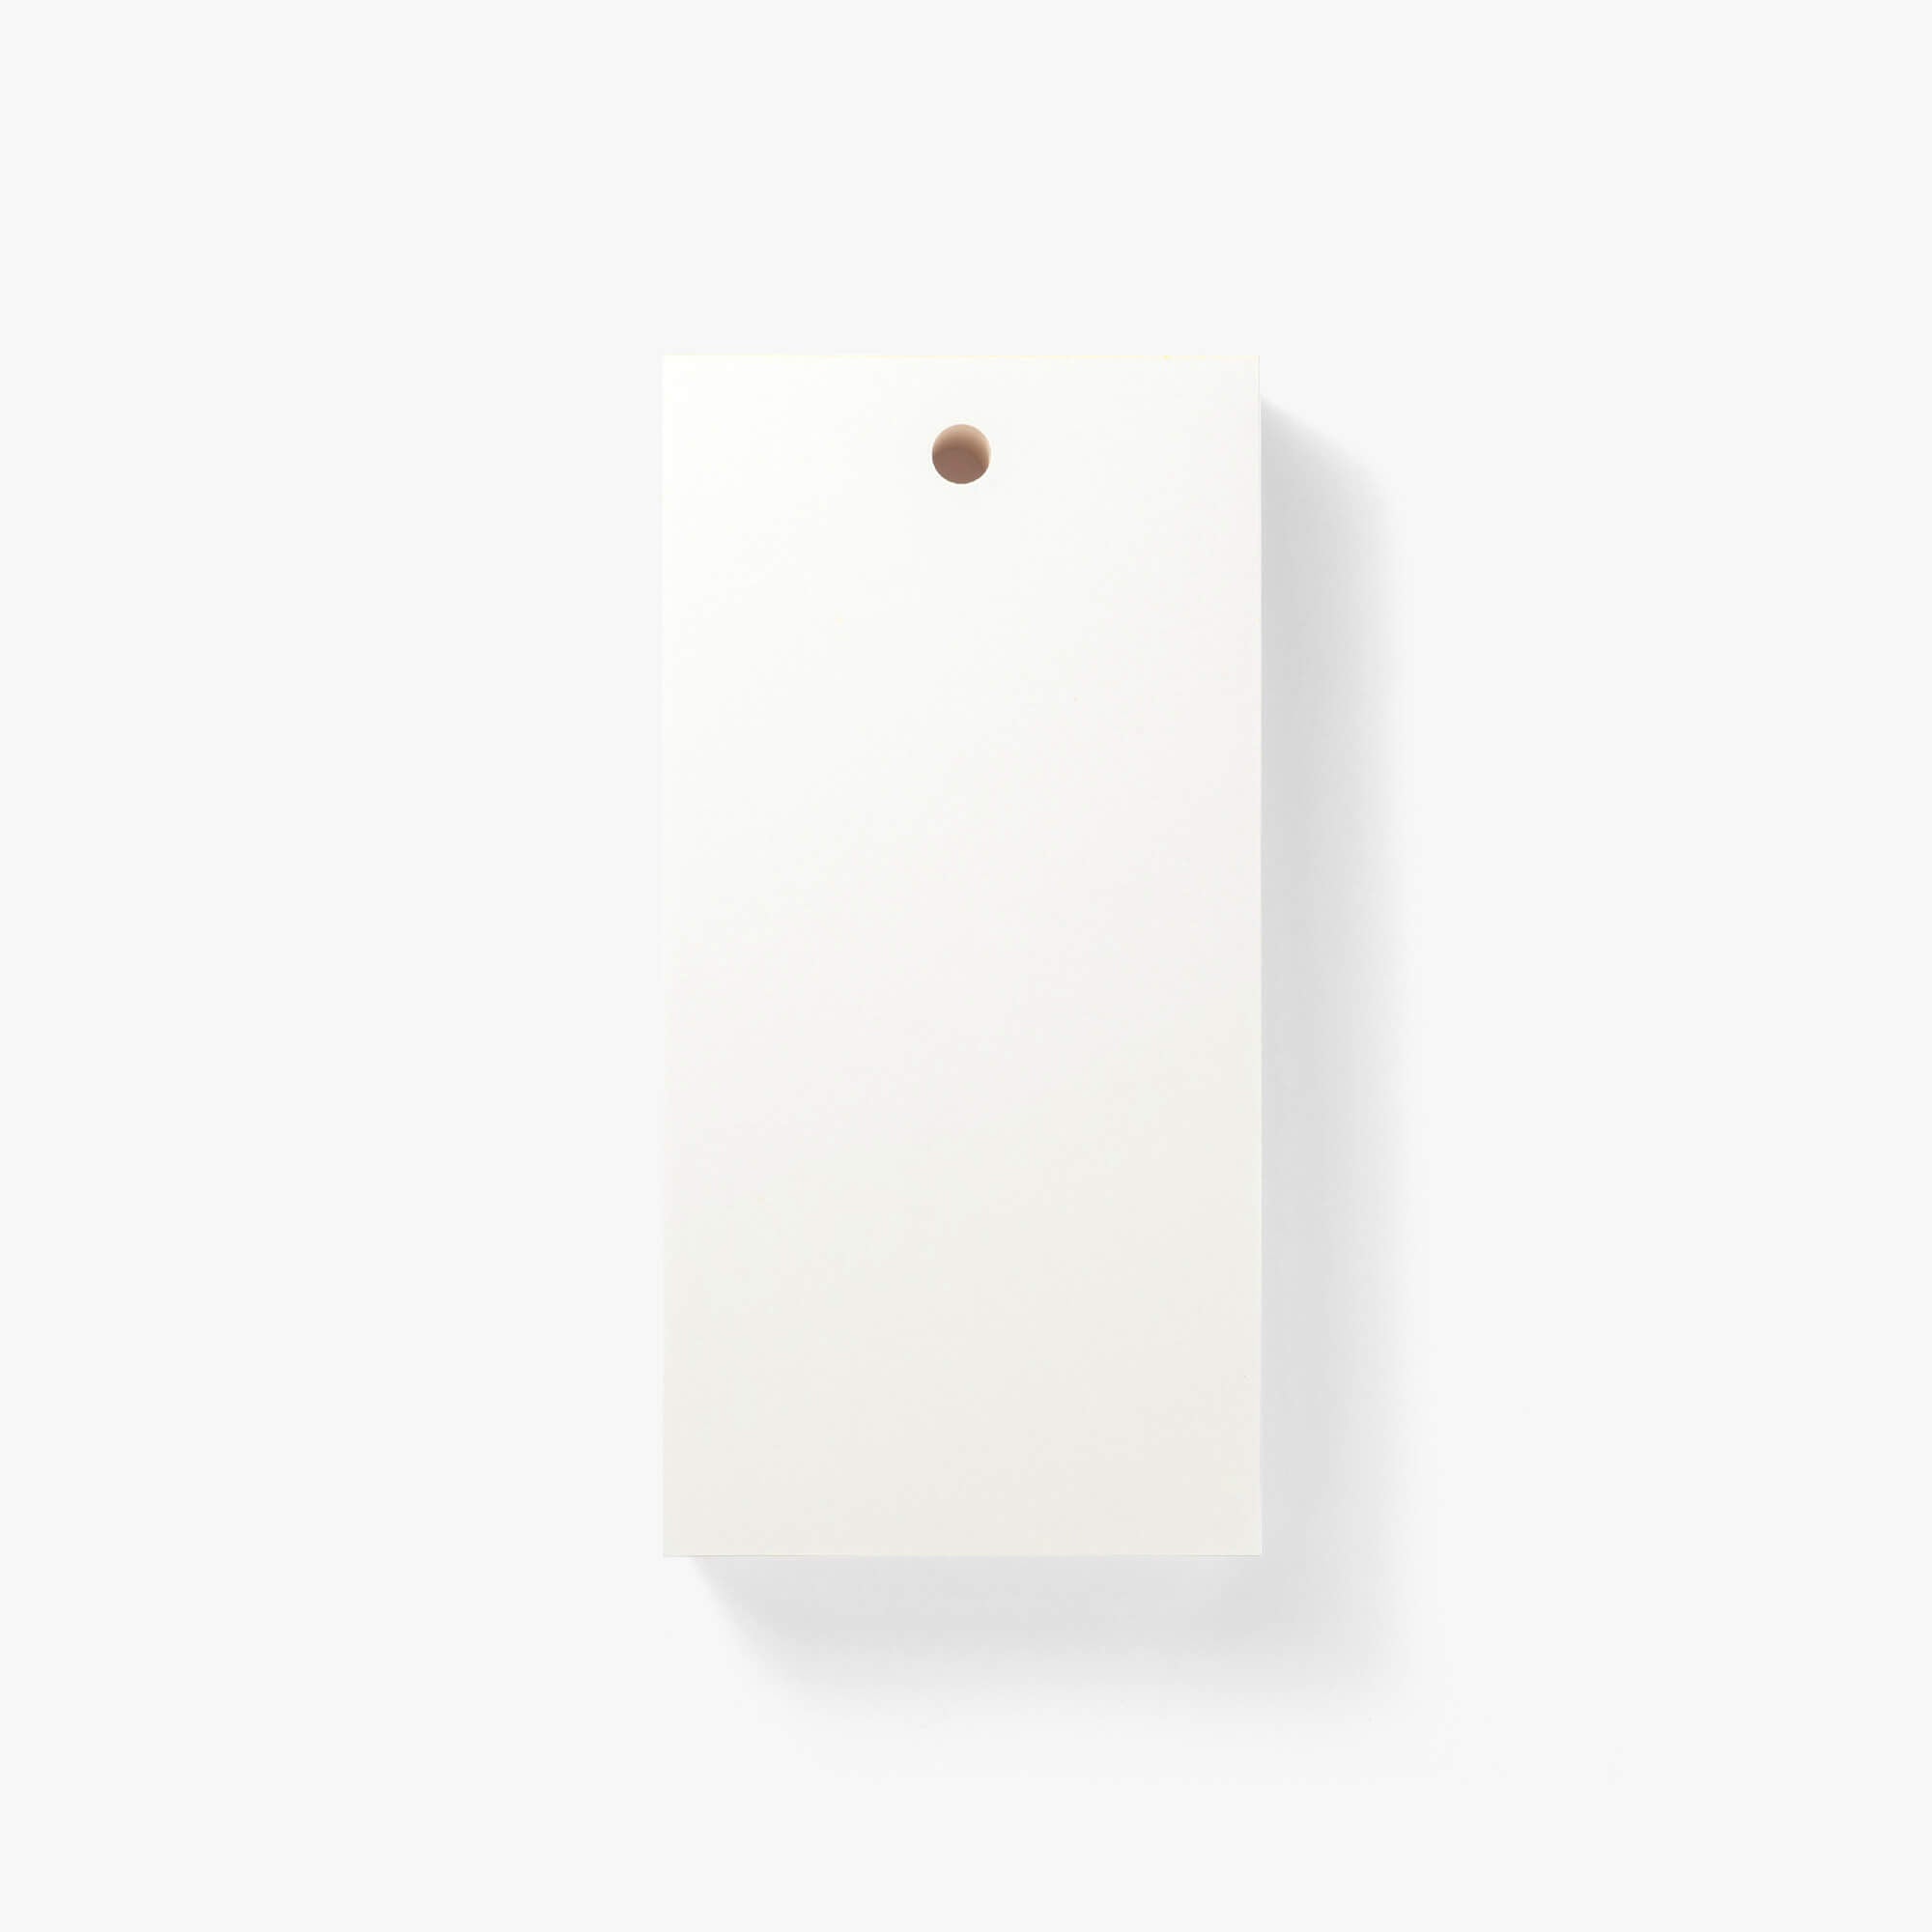 Object Index - Penstand Notepad